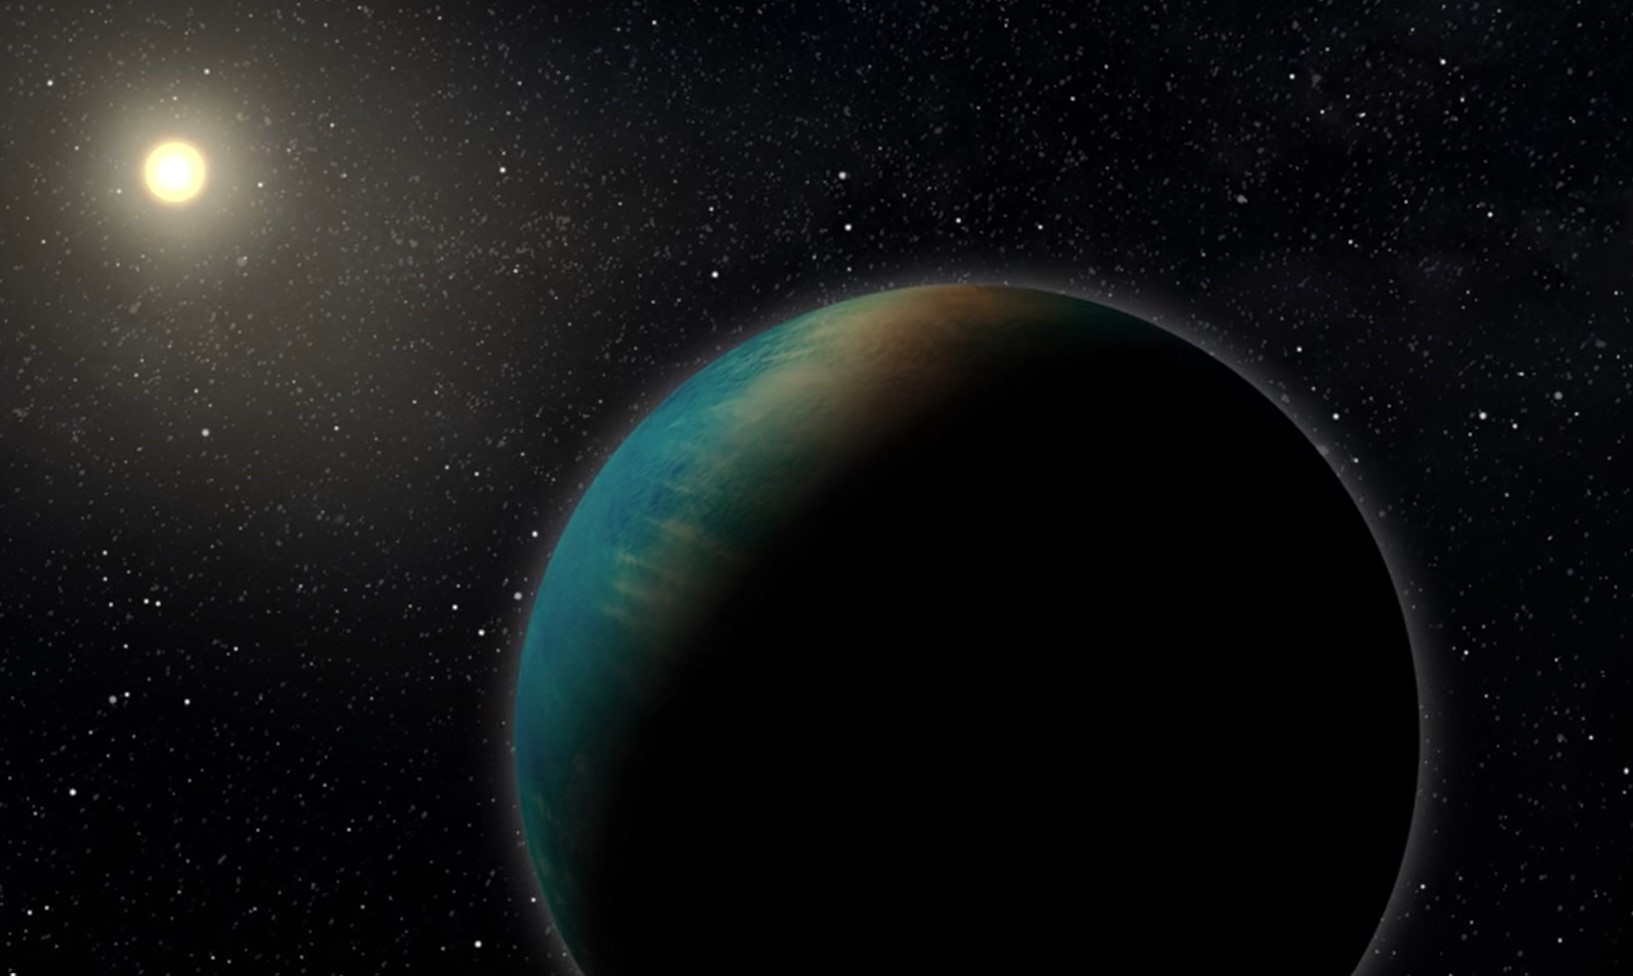 An extrasolar world covered in water?